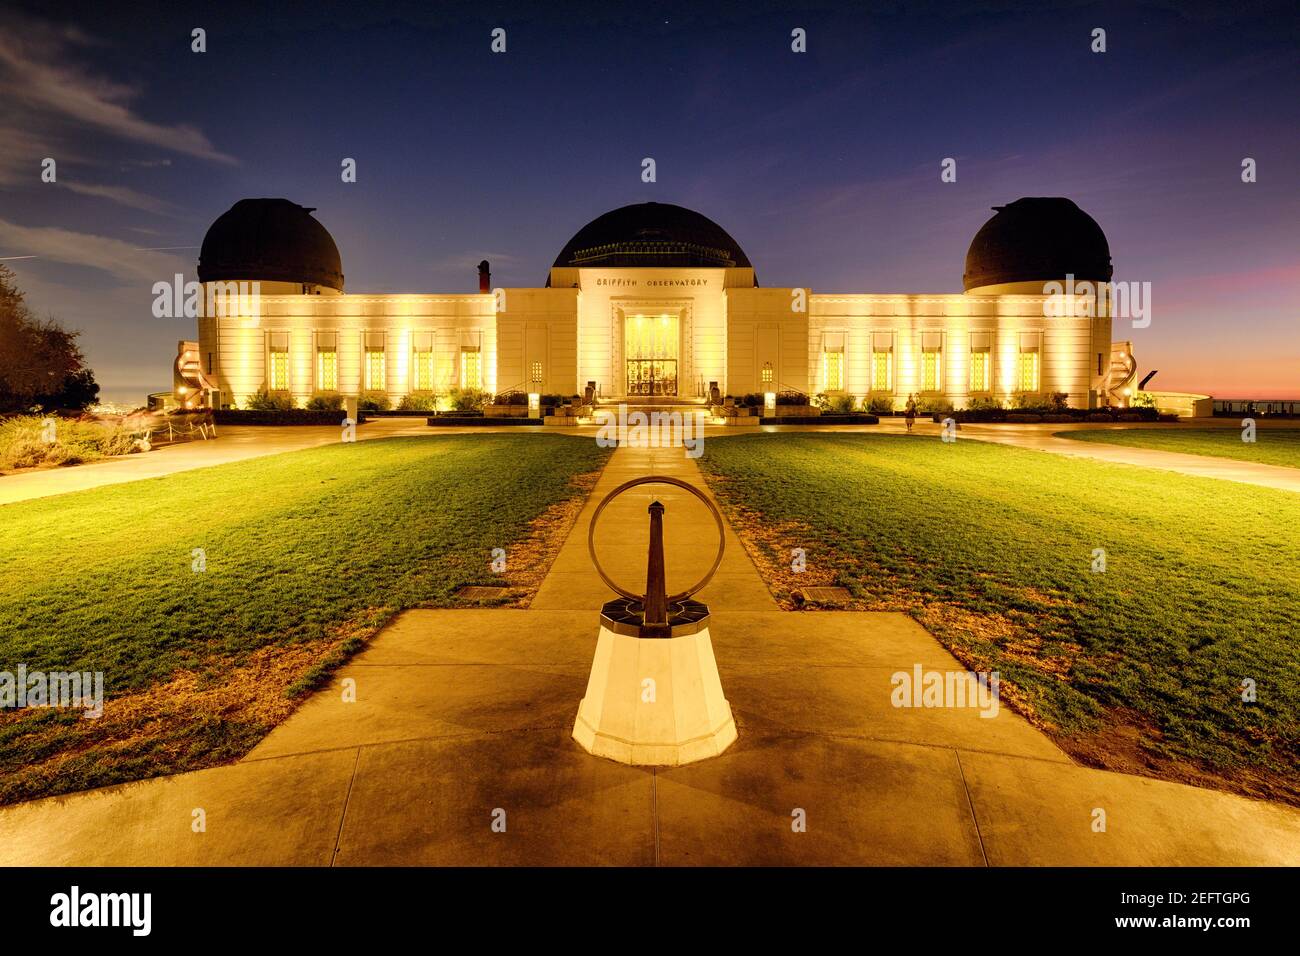 Griffith Observatory Lit Up At Night, Los Angeles, California Stock Photo